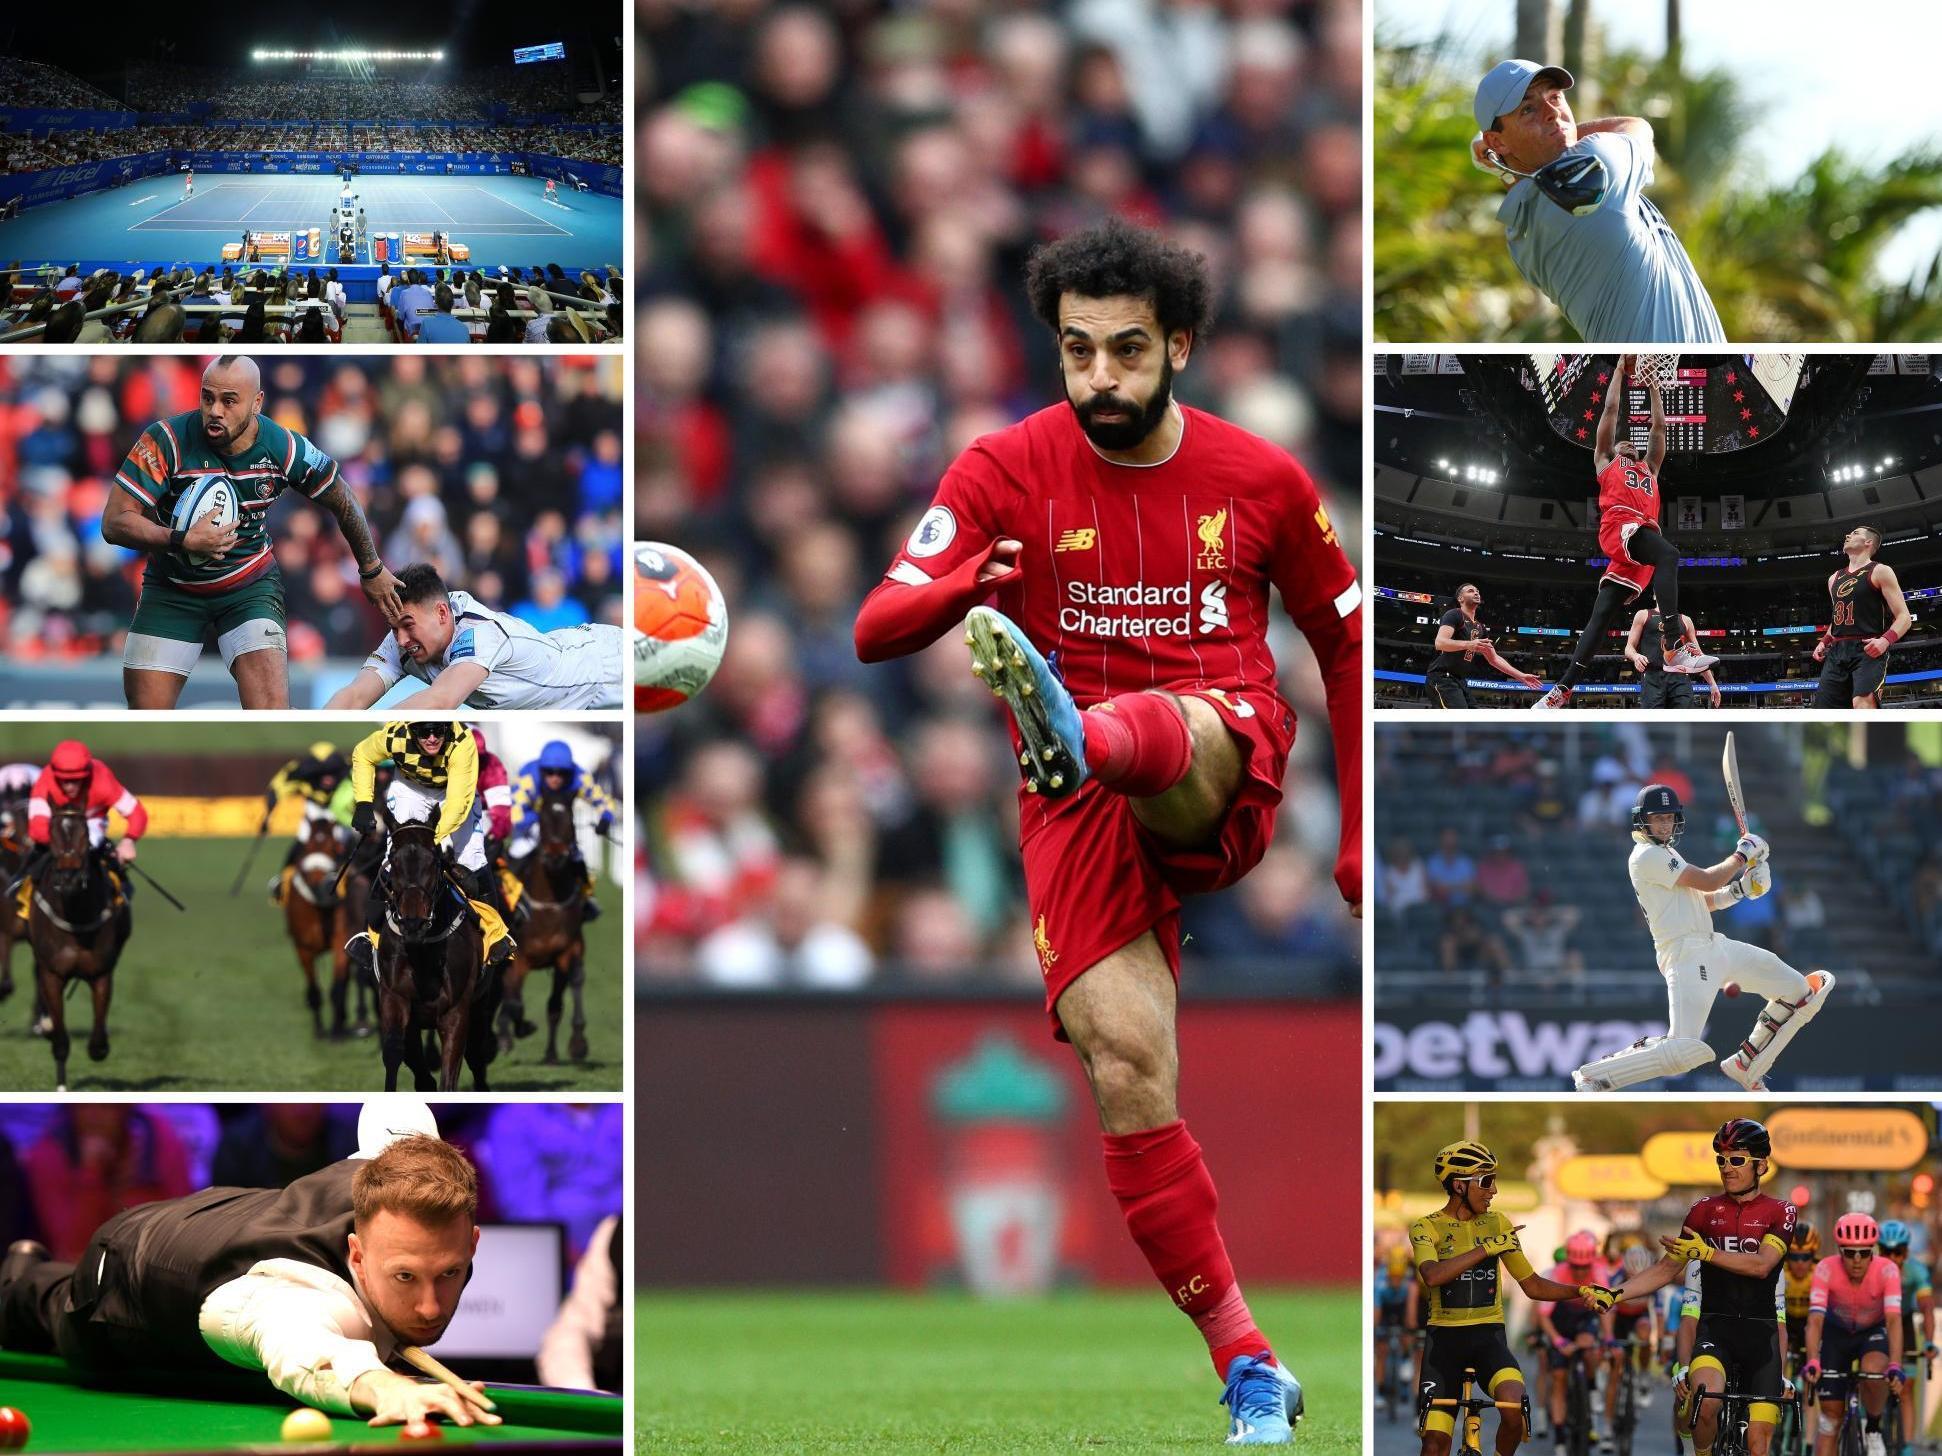 When will sport return? Restart dates for Premier League football, rugby, boxing, tennis, cricket and more